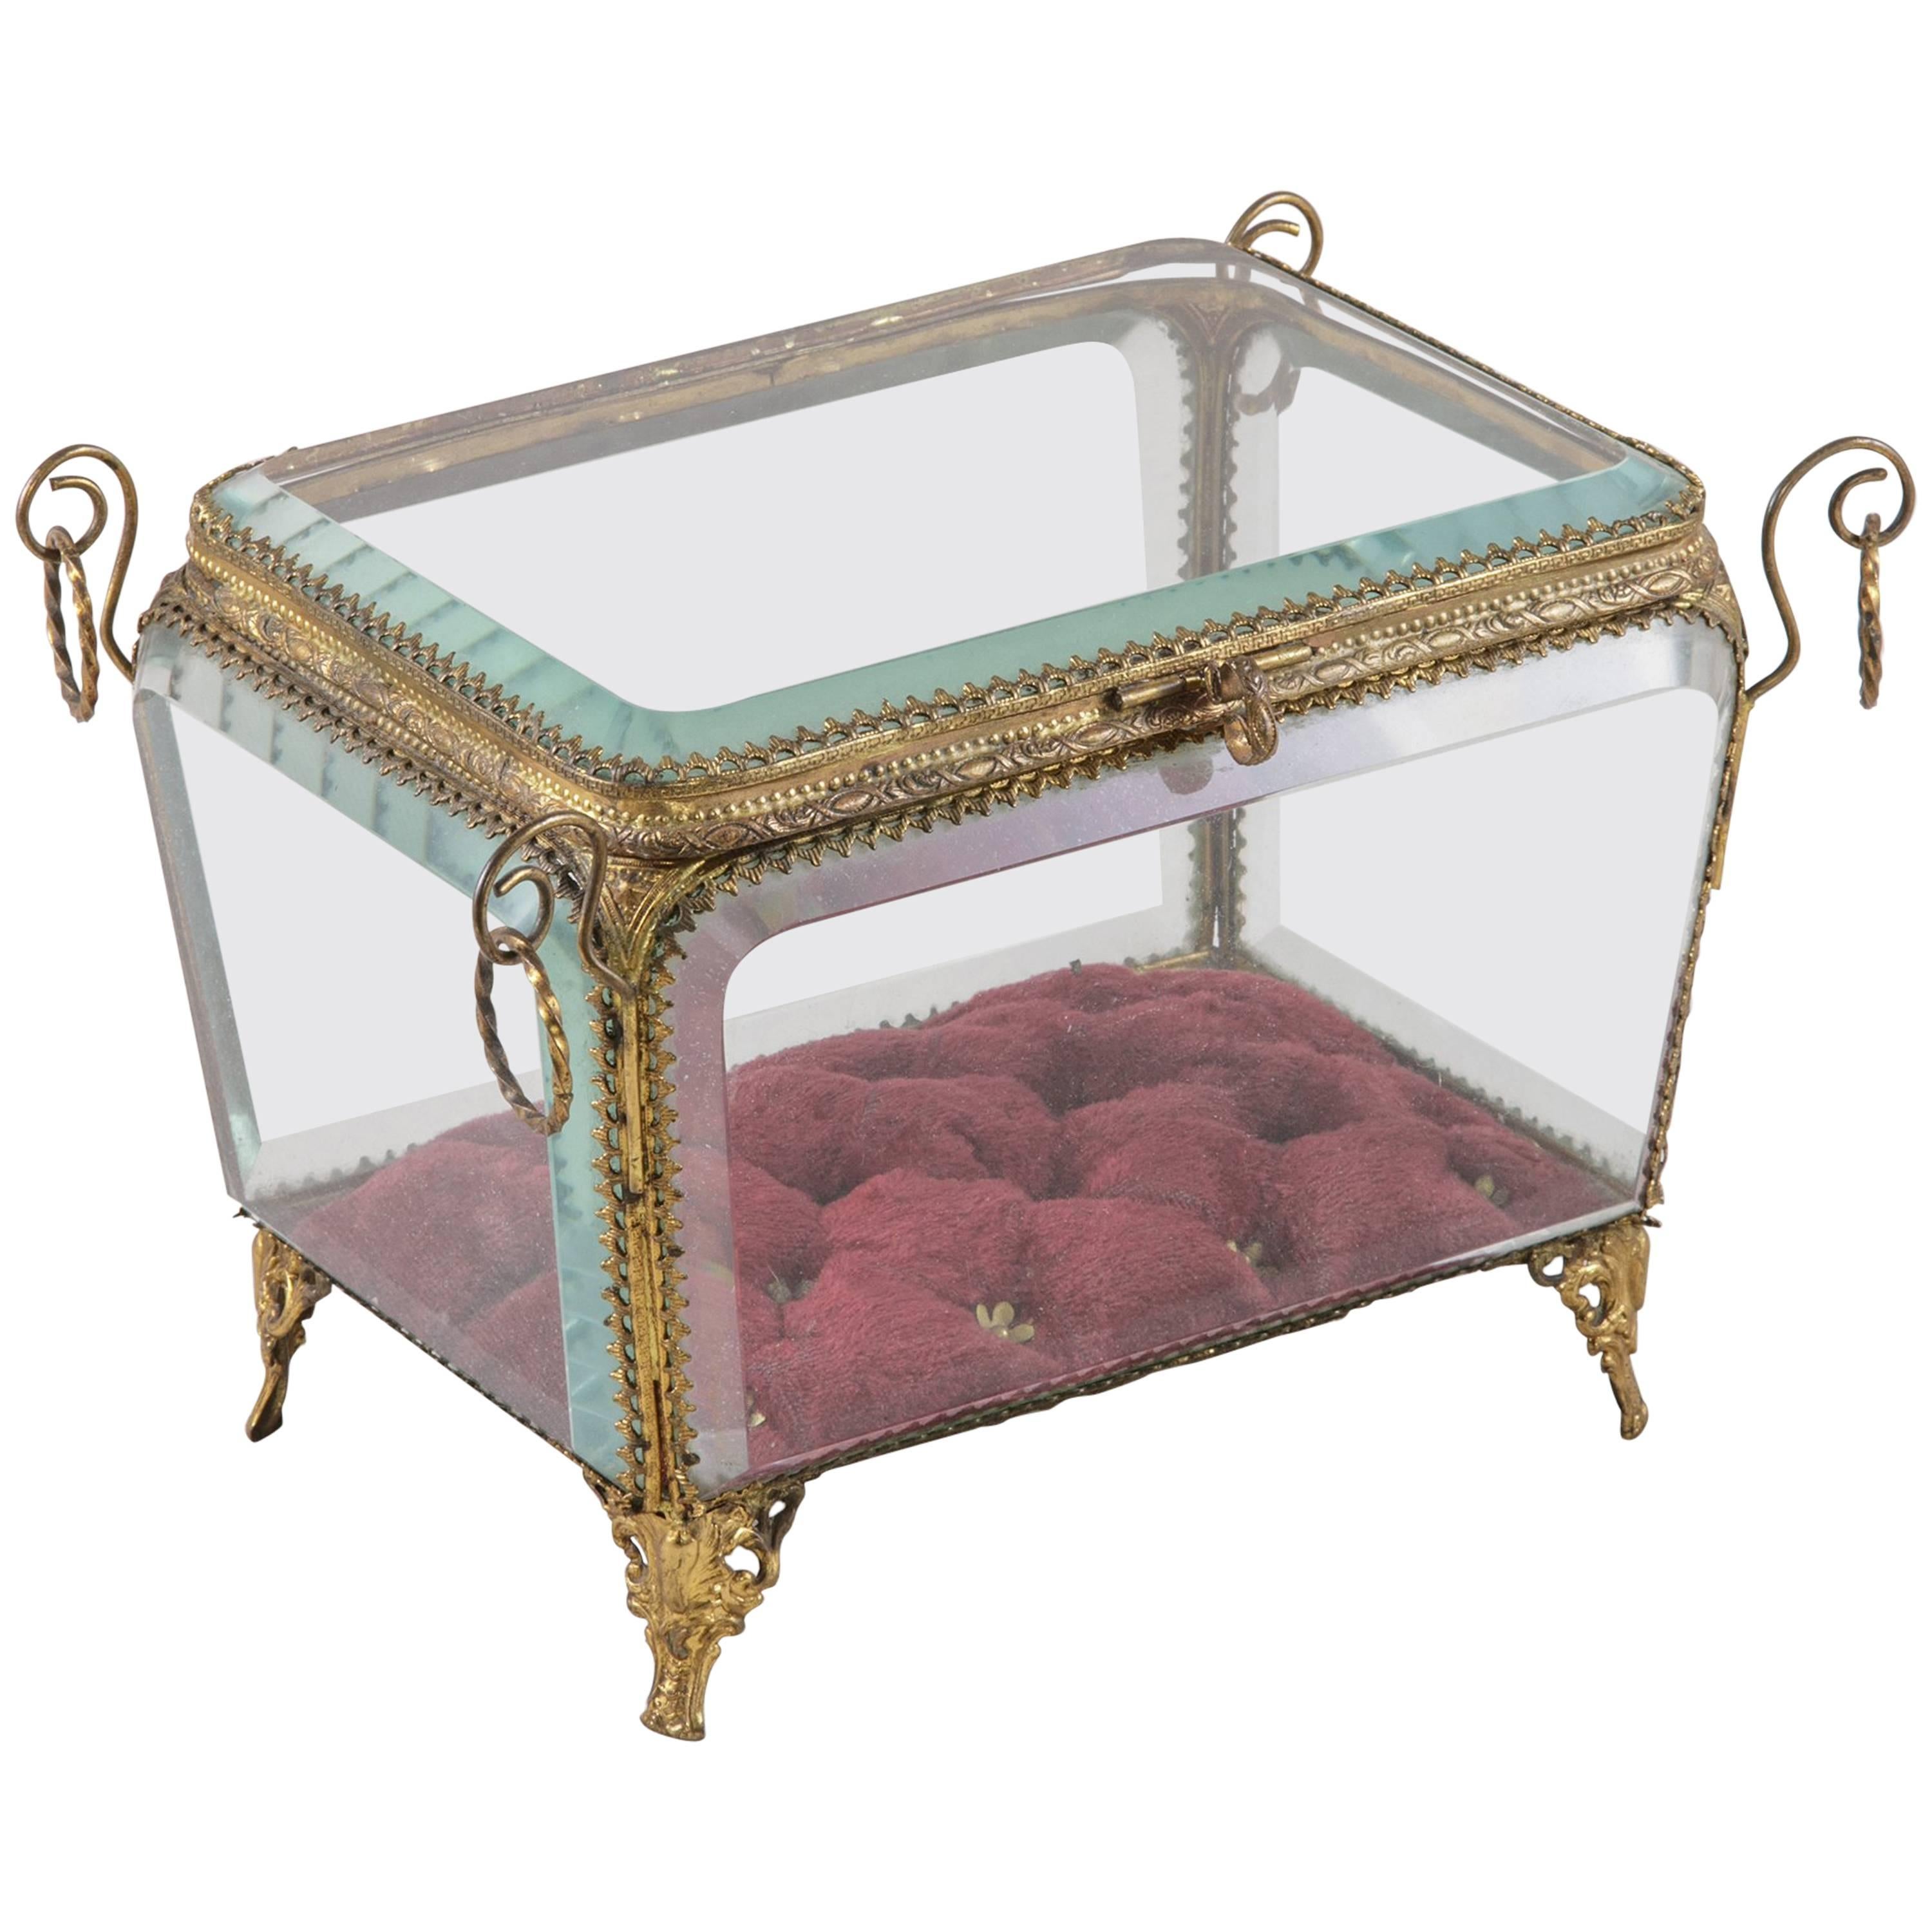 19th Century French Napoleon III Period Cut Crystal and Brass Jewelry Box